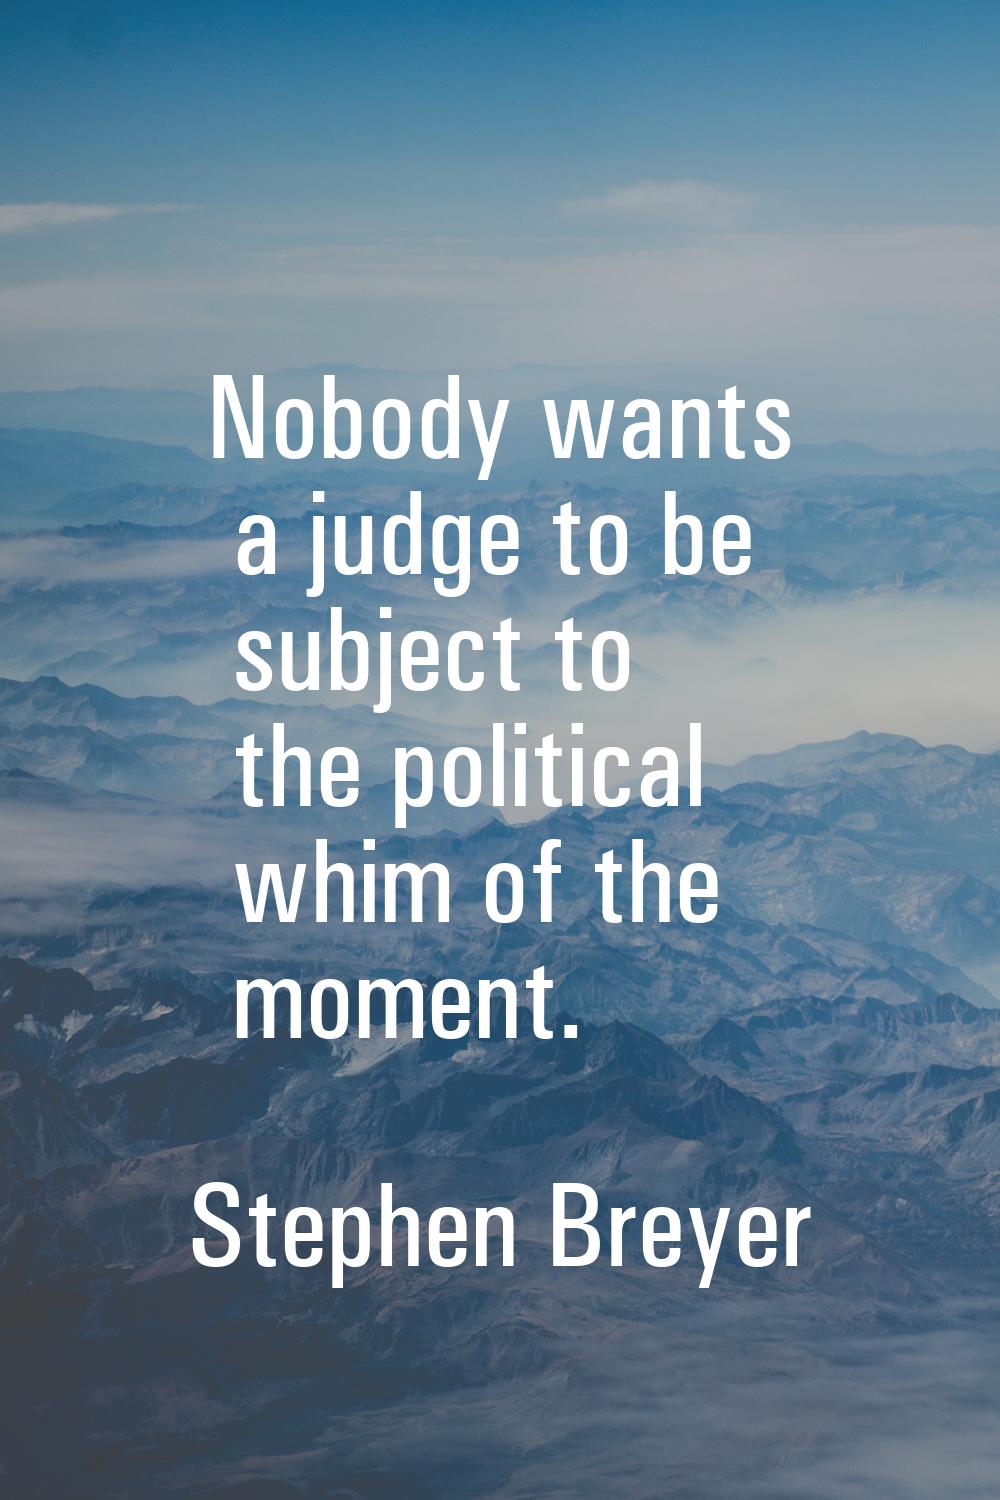 Nobody wants a judge to be subject to the political whim of the moment.